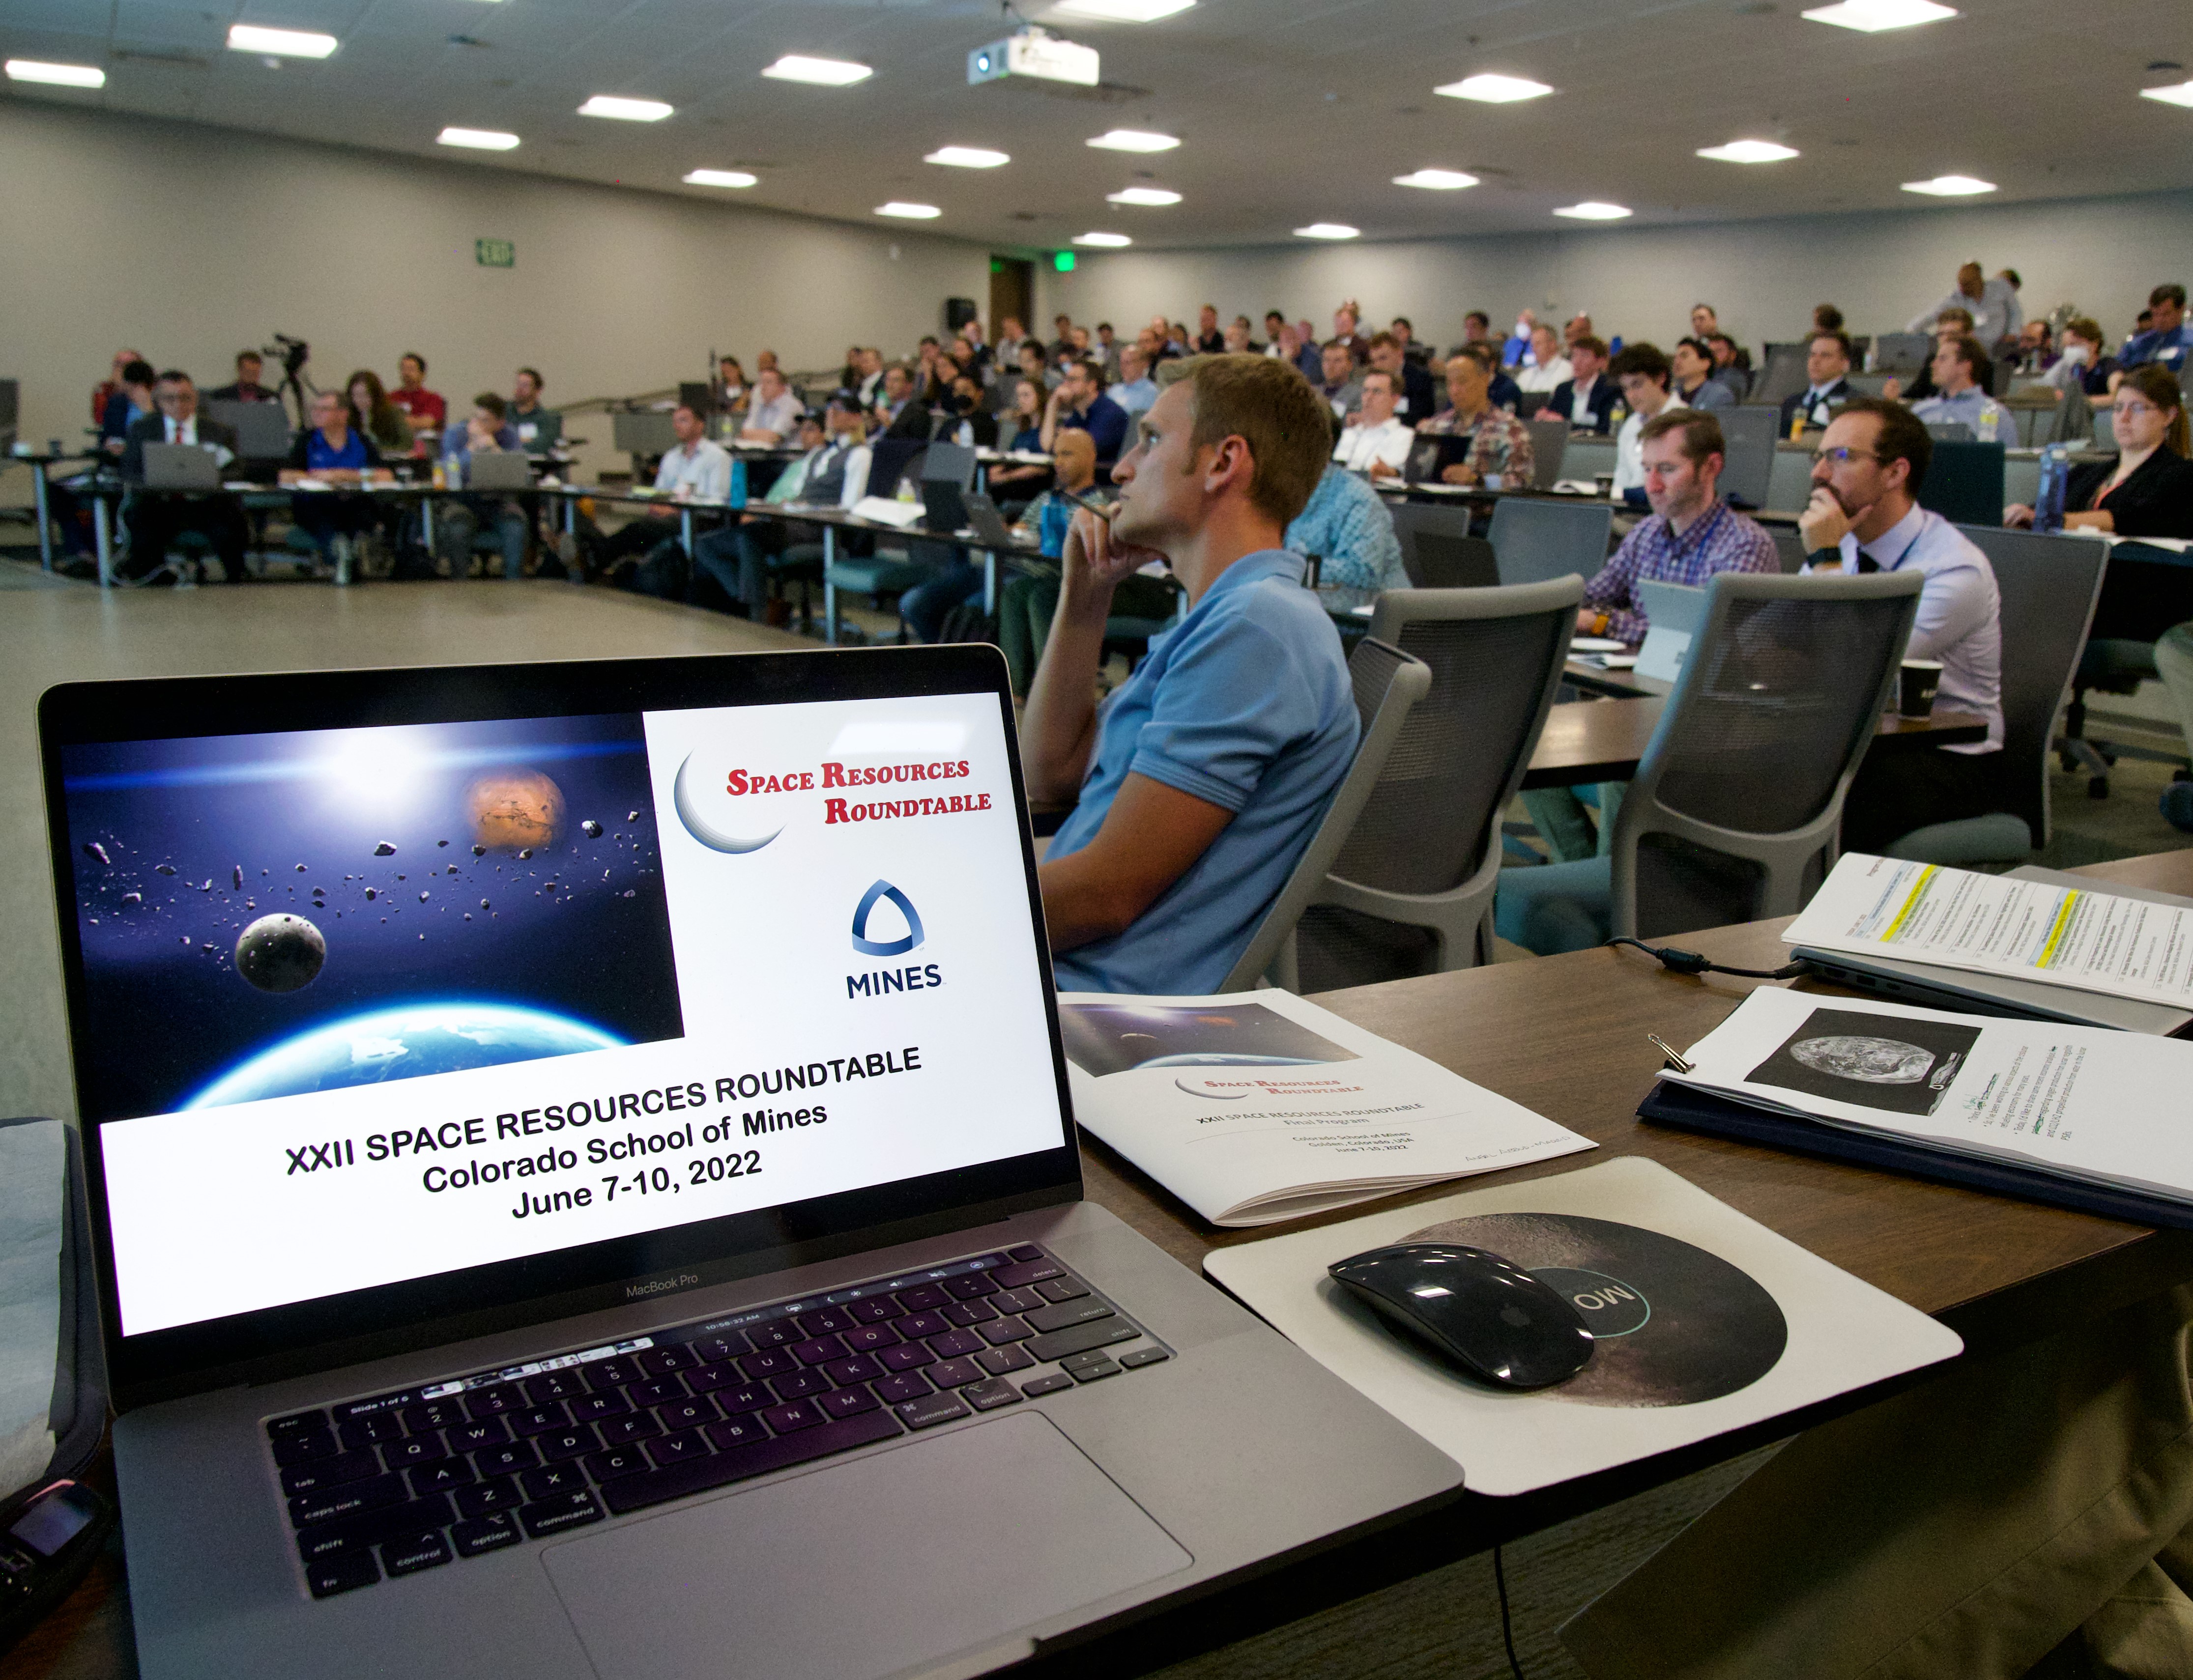 Experts gather at the Colorado School of Mines to attend a space resources roundtable, drawing together scientists, engineers, entrepreneurs, mining and minerals industry specialists, legal experts, and policy makers.